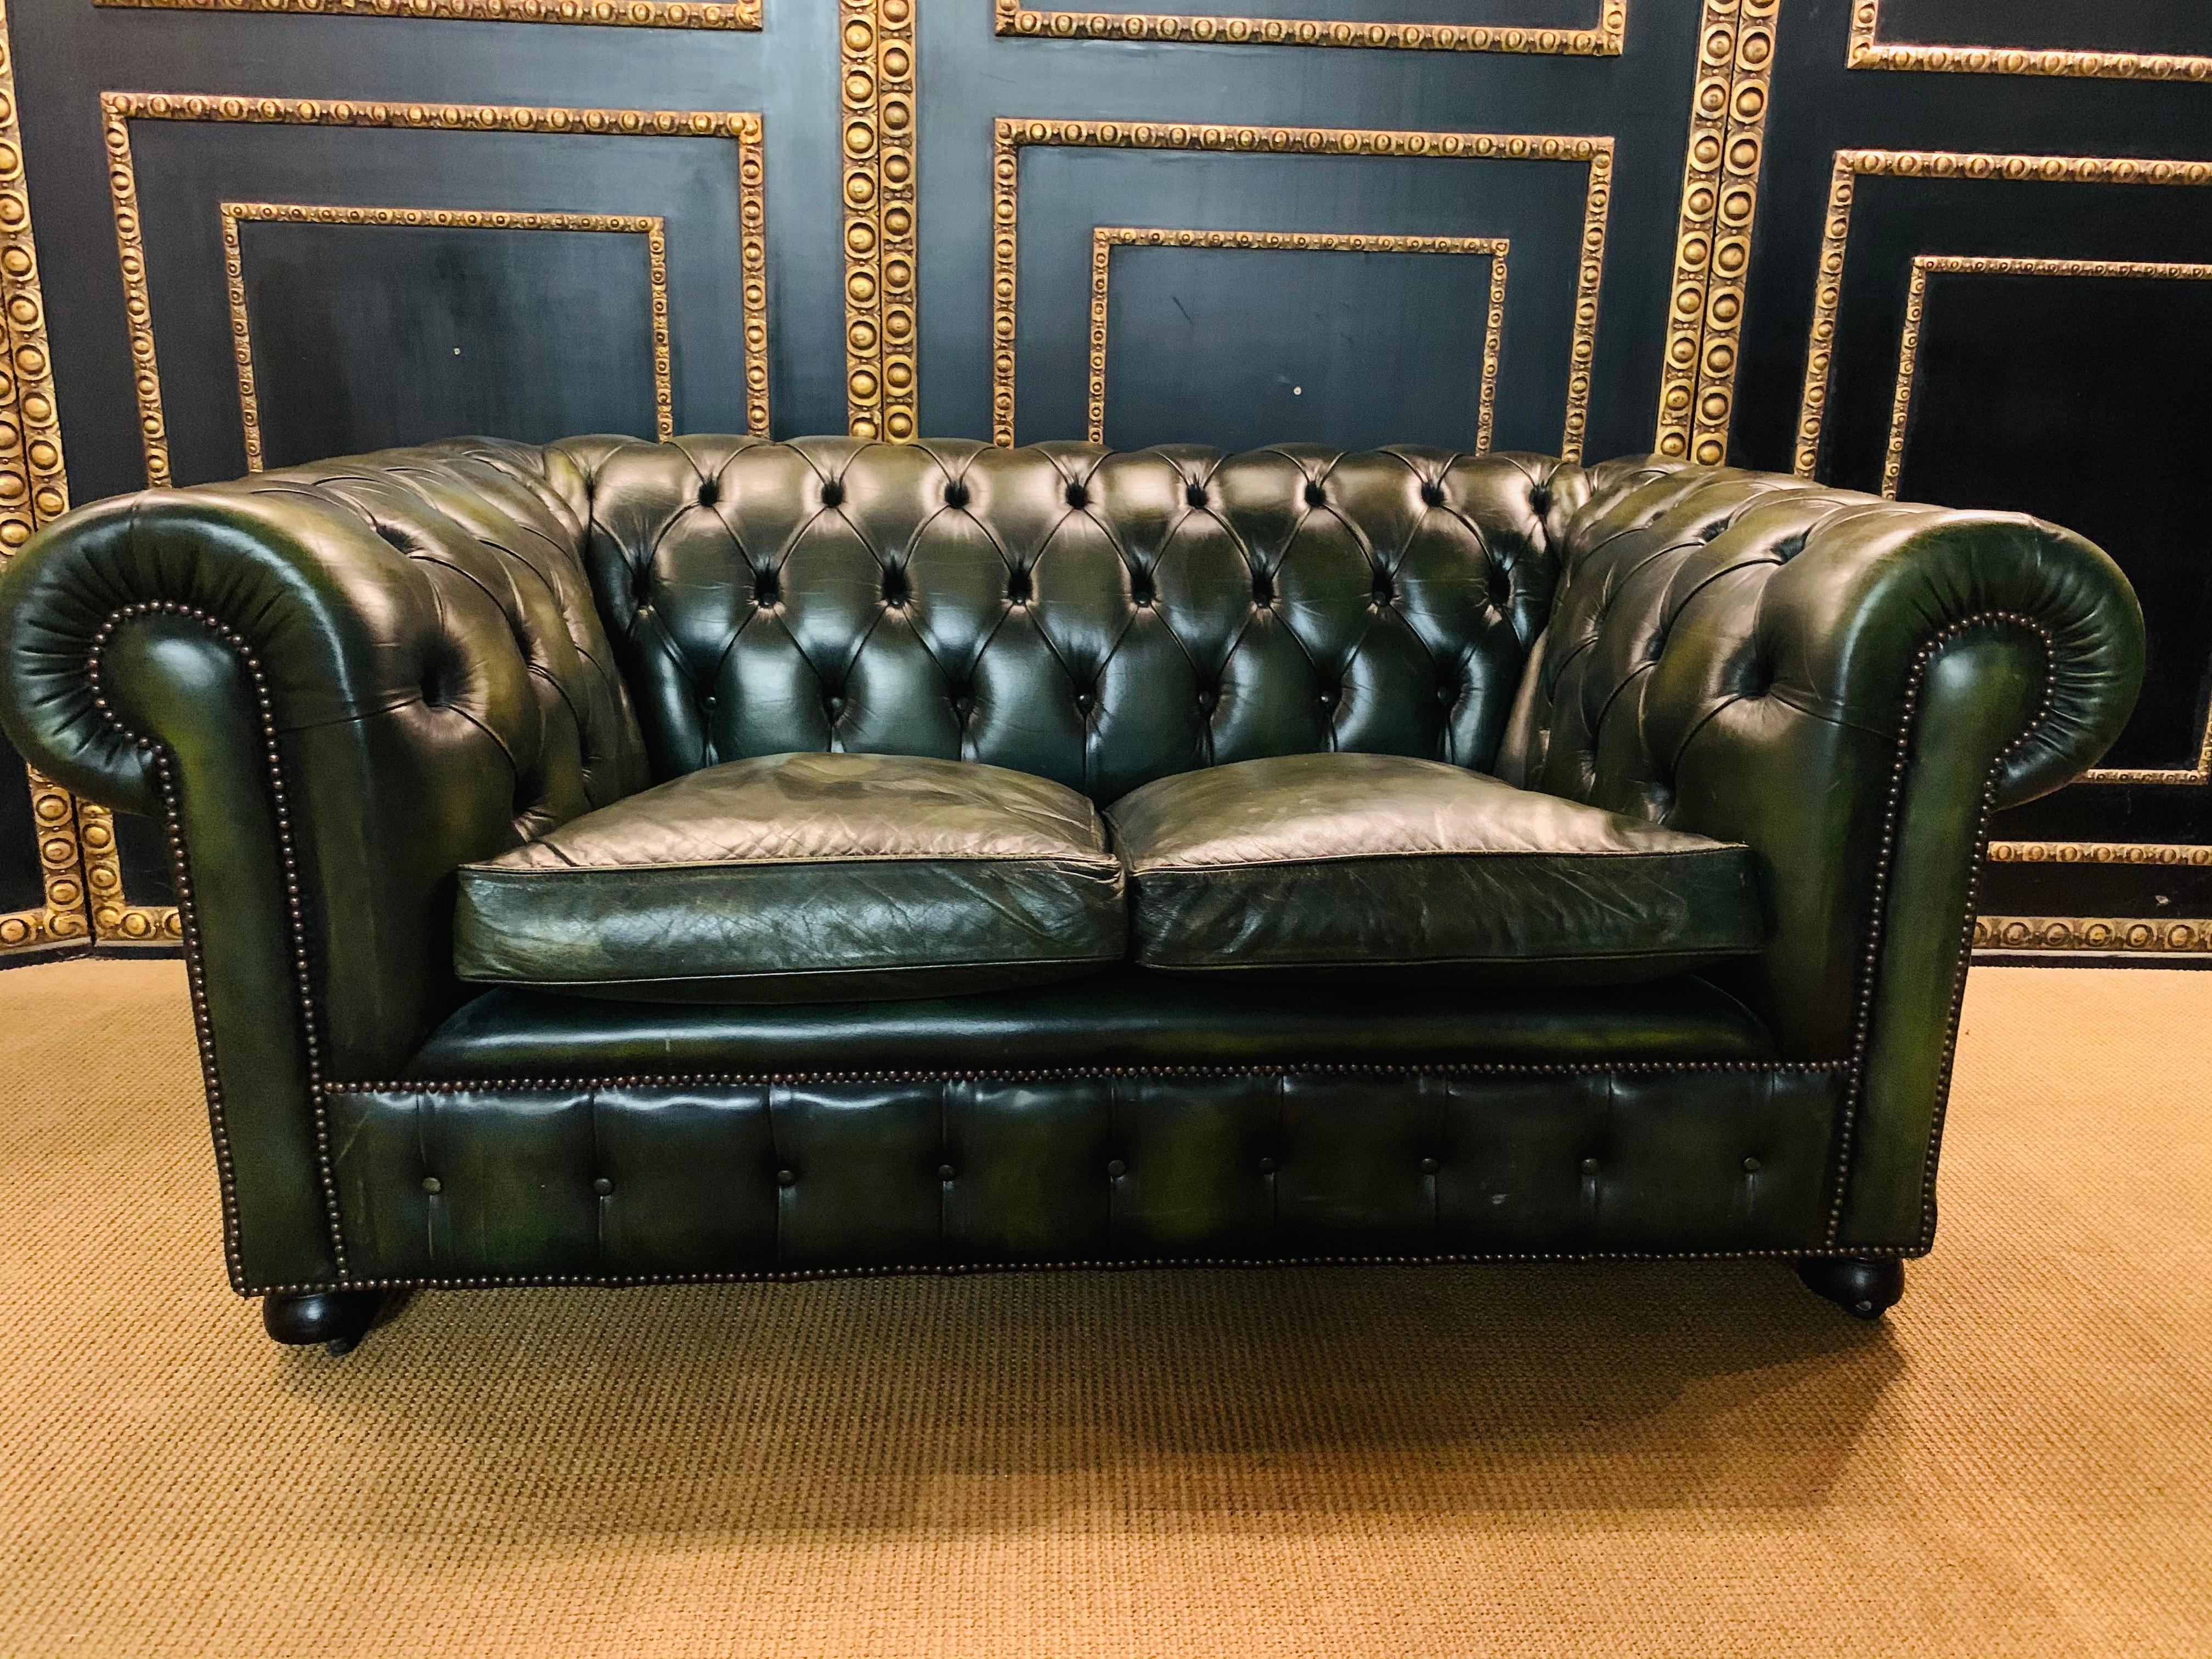 This original beautifully preserved Dark green leather small two-seat sofa is very masculine and small enough for an office. Coil sprung feather filled cushions - Vintage green leather Chesterfield sofa with original coil sprung front edge and